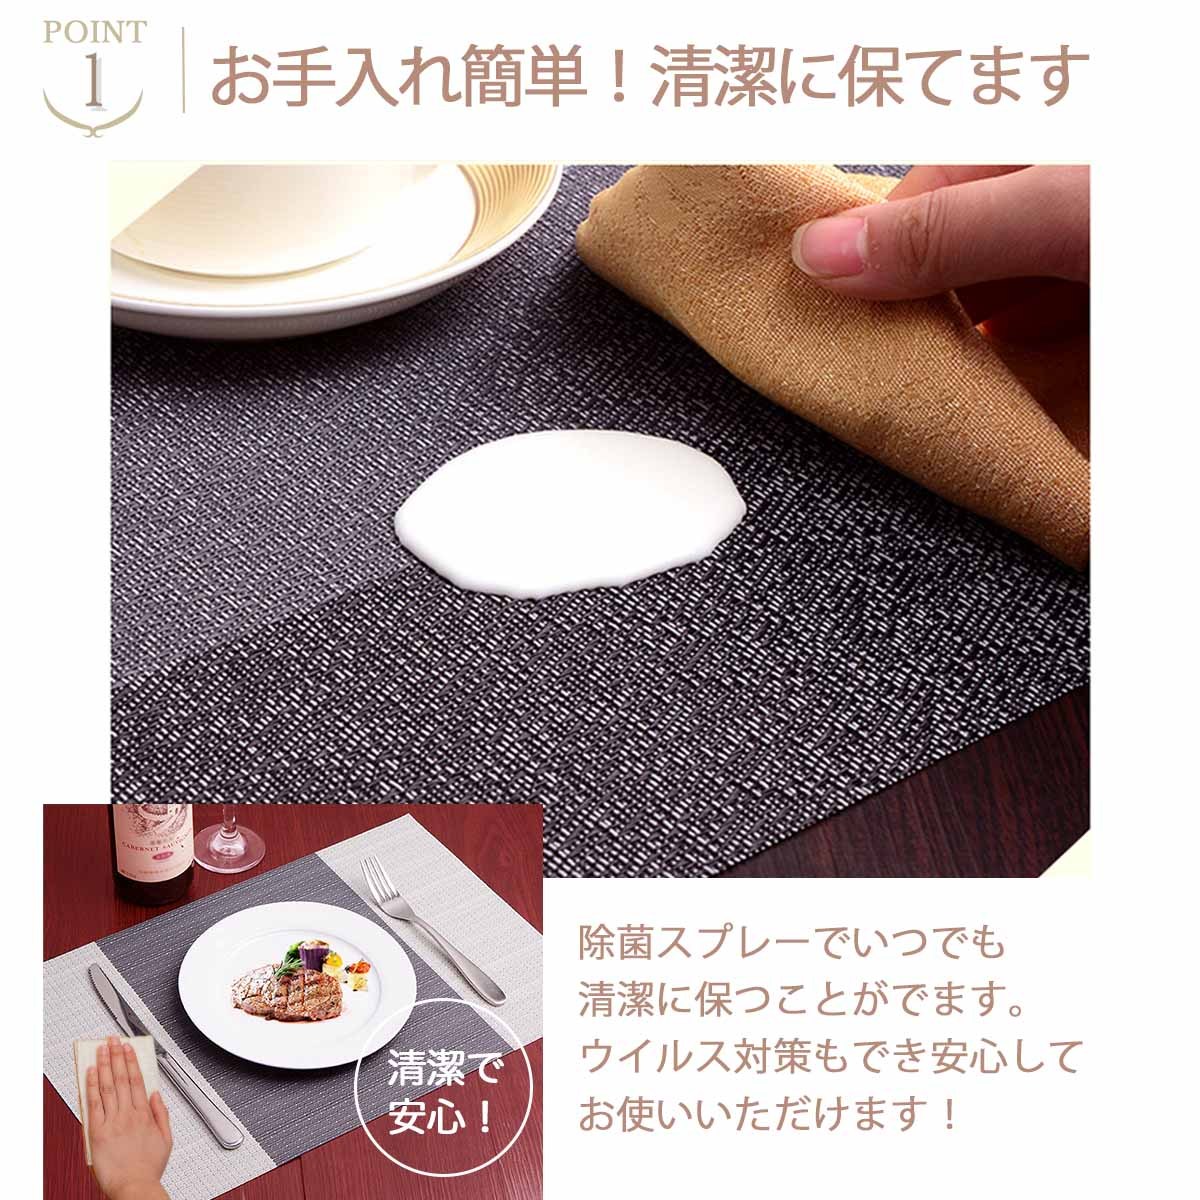  place mat stylish Northern Europe 4 pieces set washing with water possible water repelling processing . is dirty table meal dining table .... from desk ...